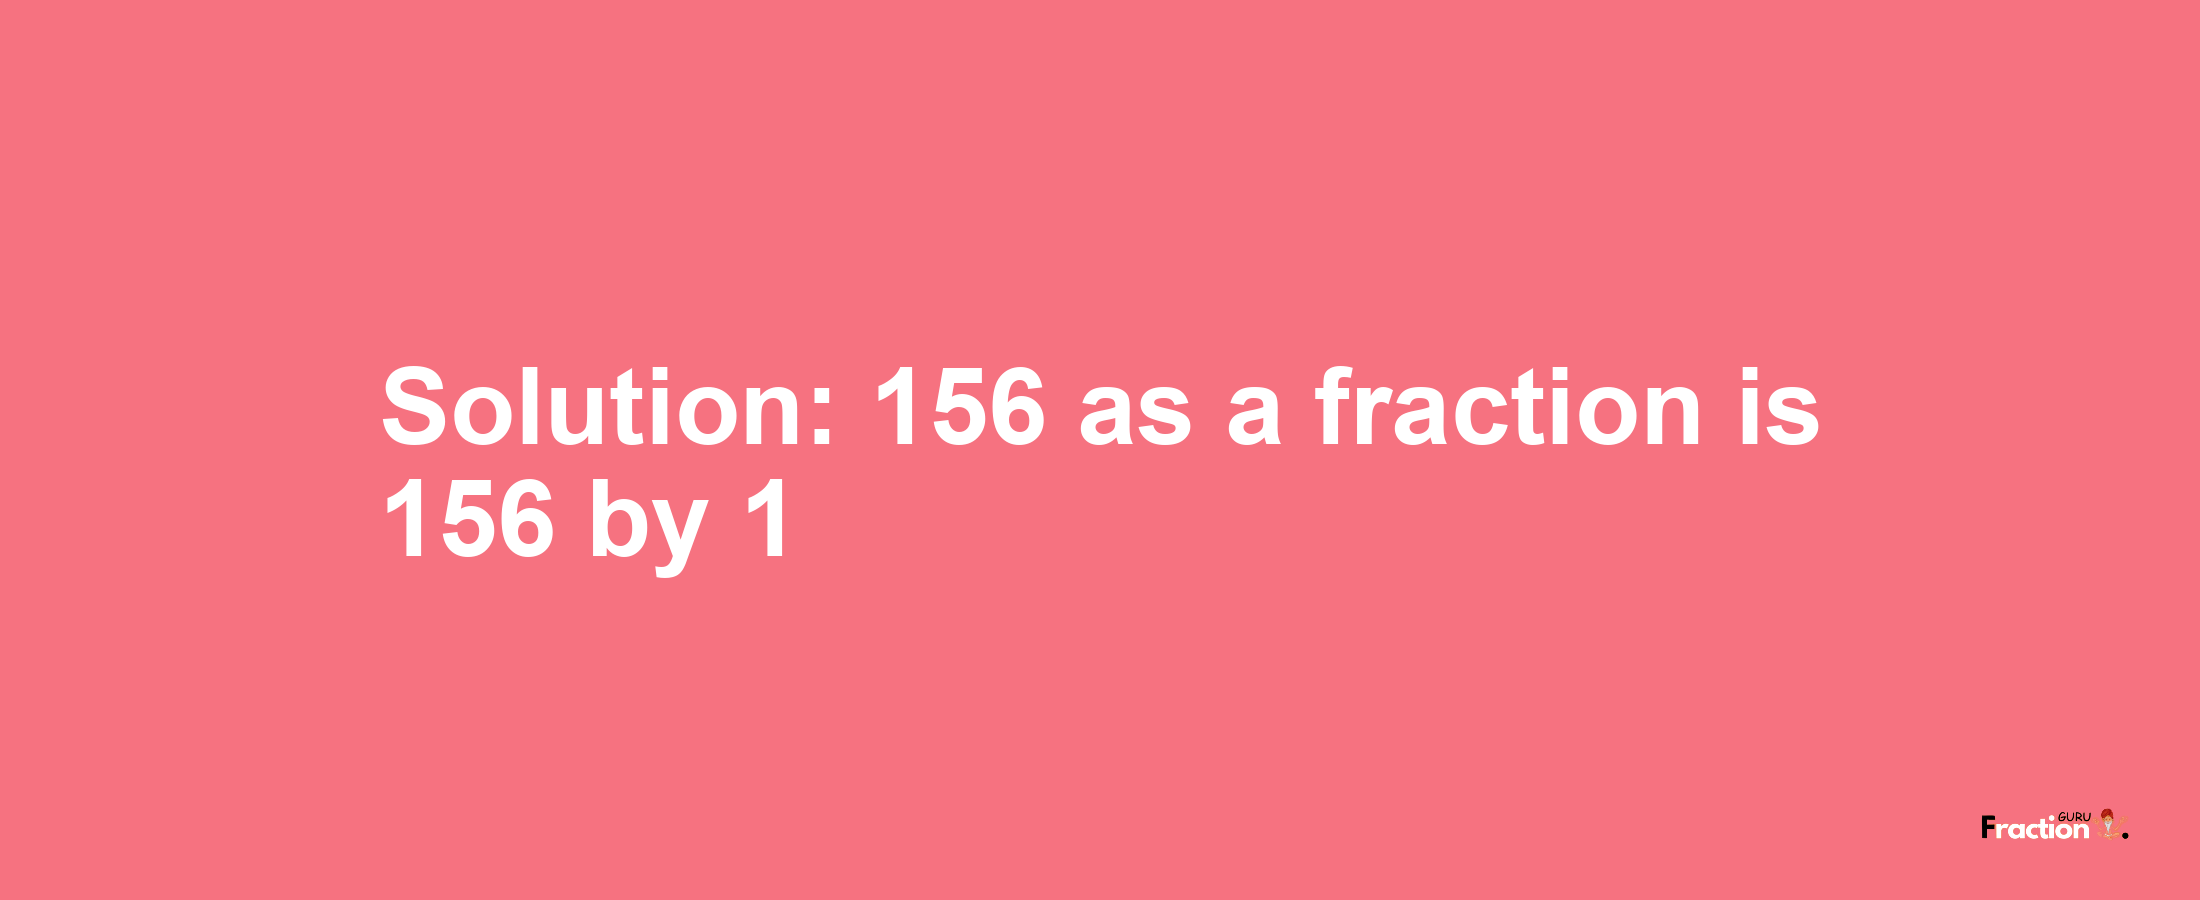 Solution:156 as a fraction is 156/1